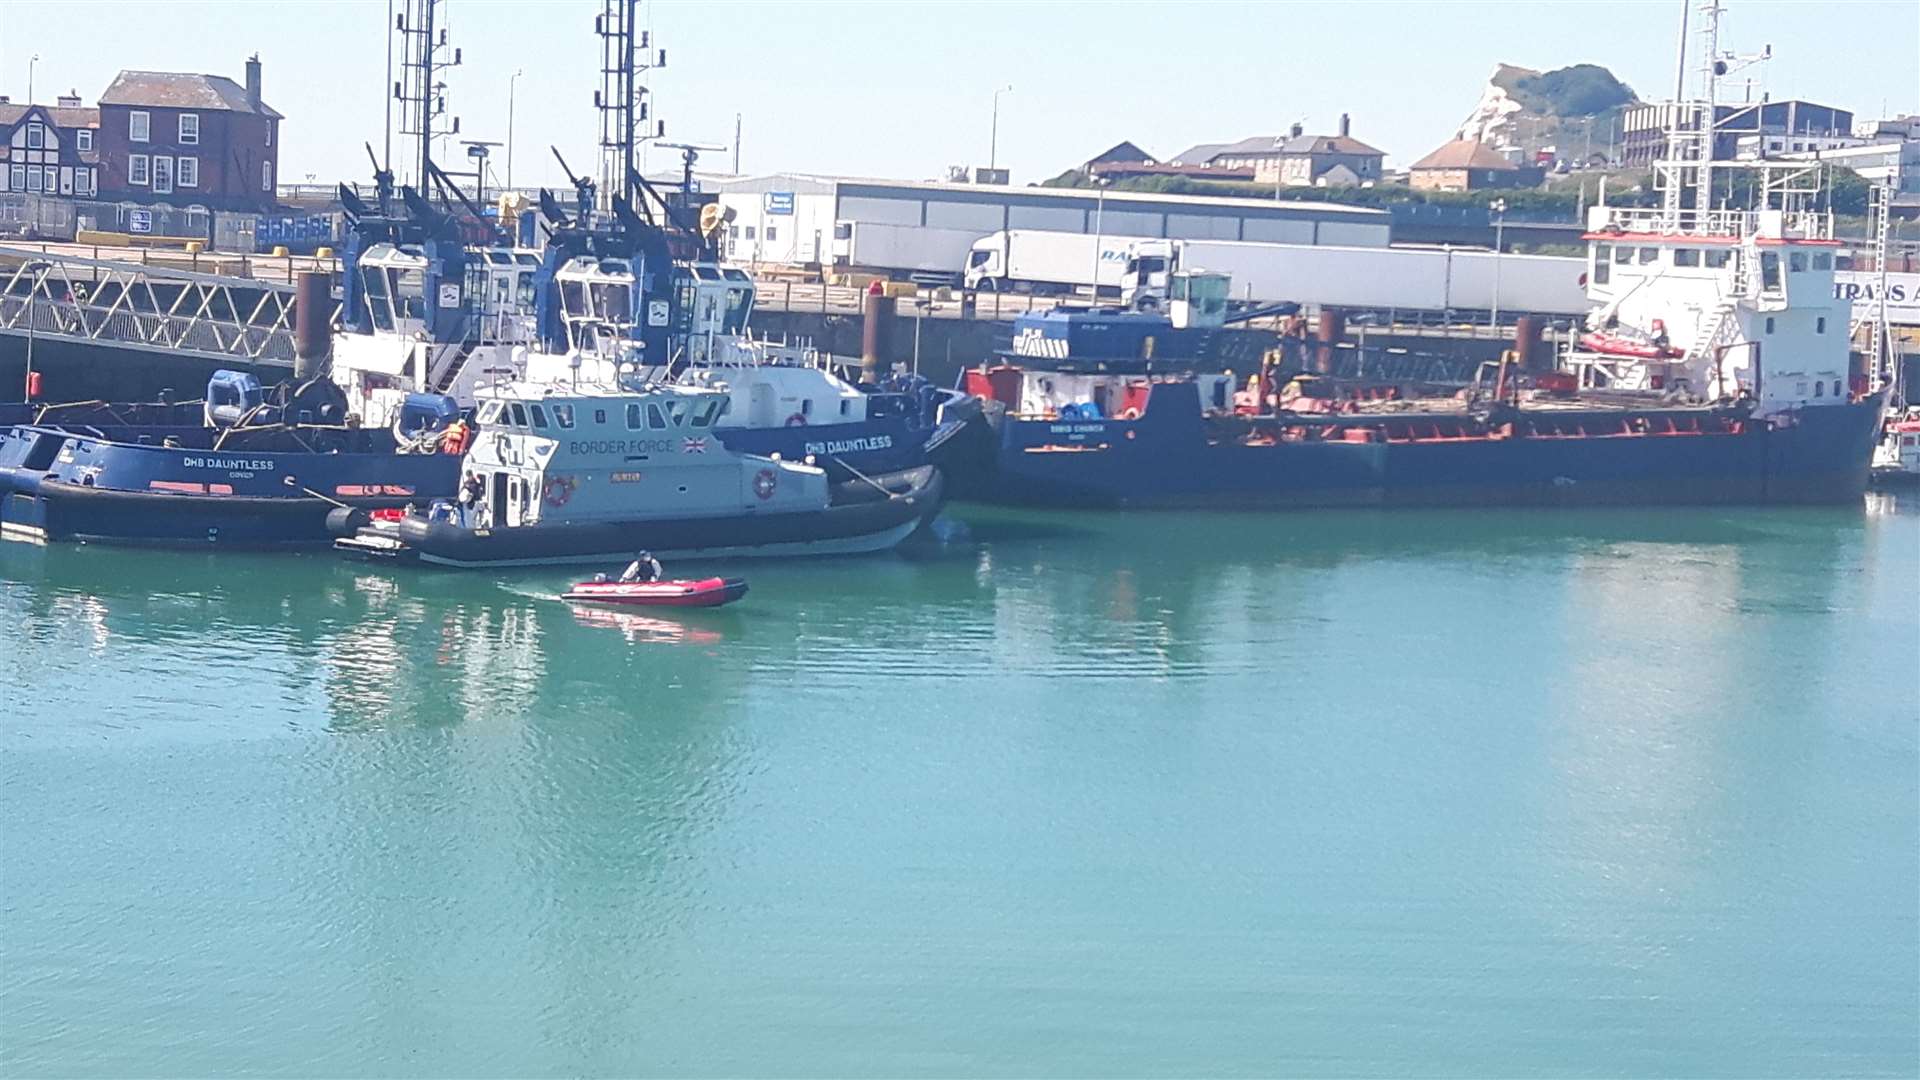 The small boat that carried the migrants from France is driven away and it will be stored